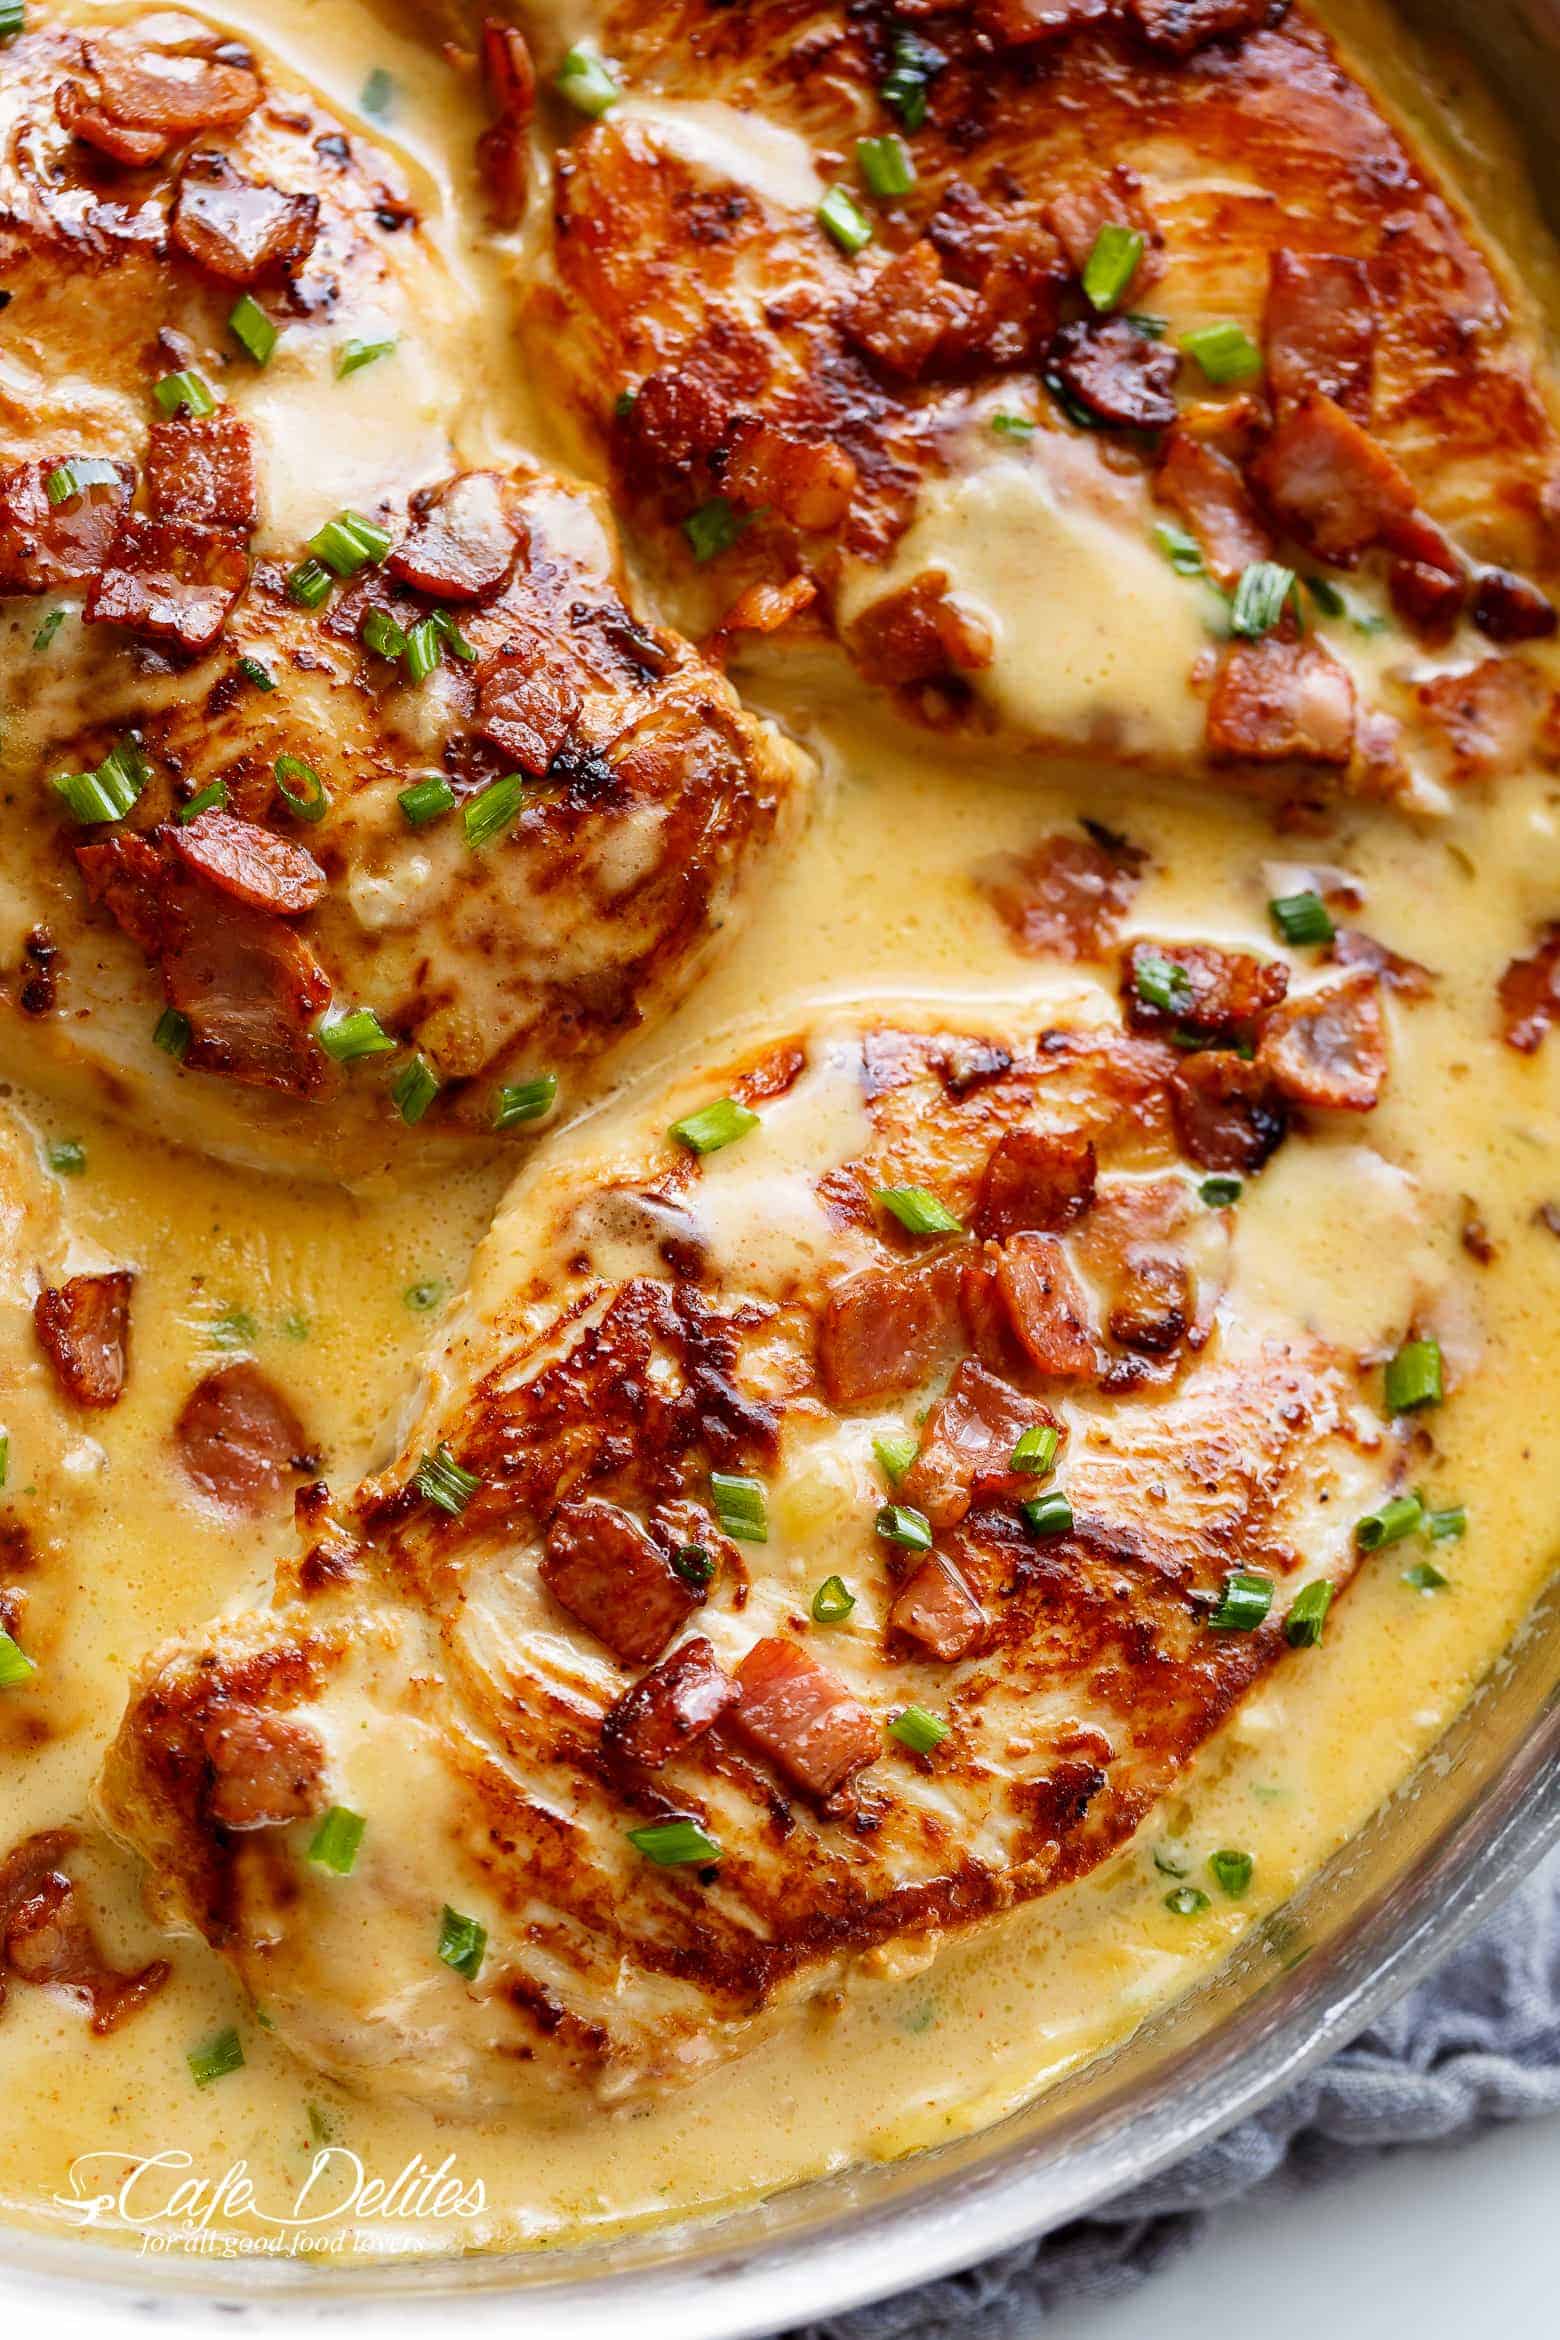 Creamy Beer Cheese Chicken With Crispy Bacon is ready in less than 20 minutes! Beer, cheddar cheese, pan fried chicken AND bacon? What's not to love!